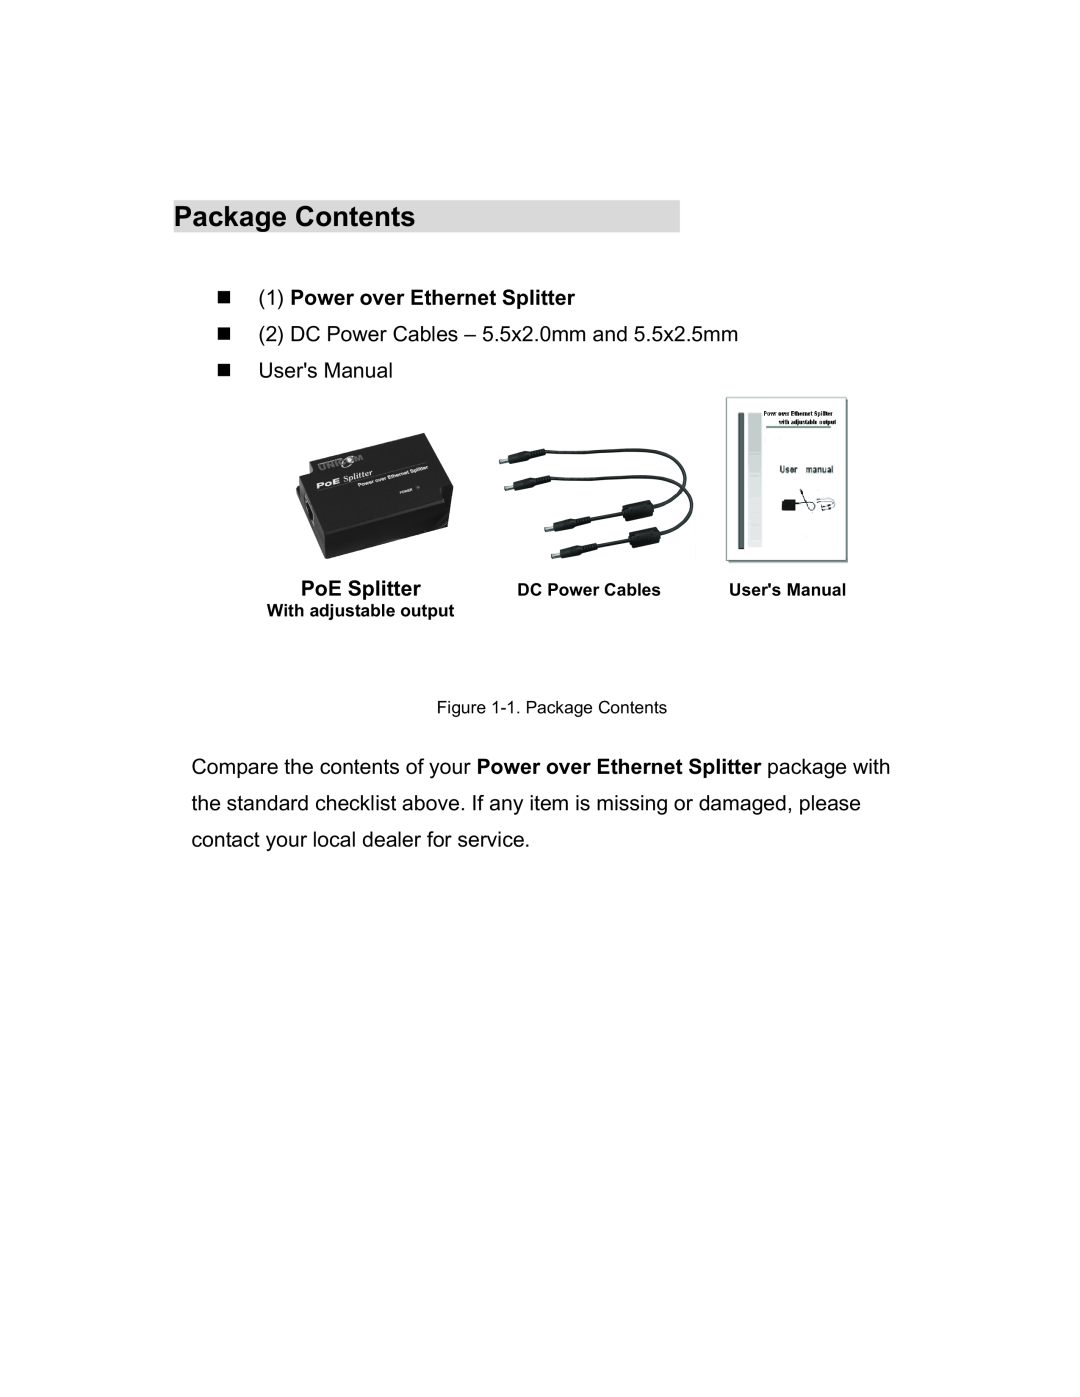 UNICOM Electric 802.3af user manual DC Power Cables, 1.Package Contents, With adjustable output 